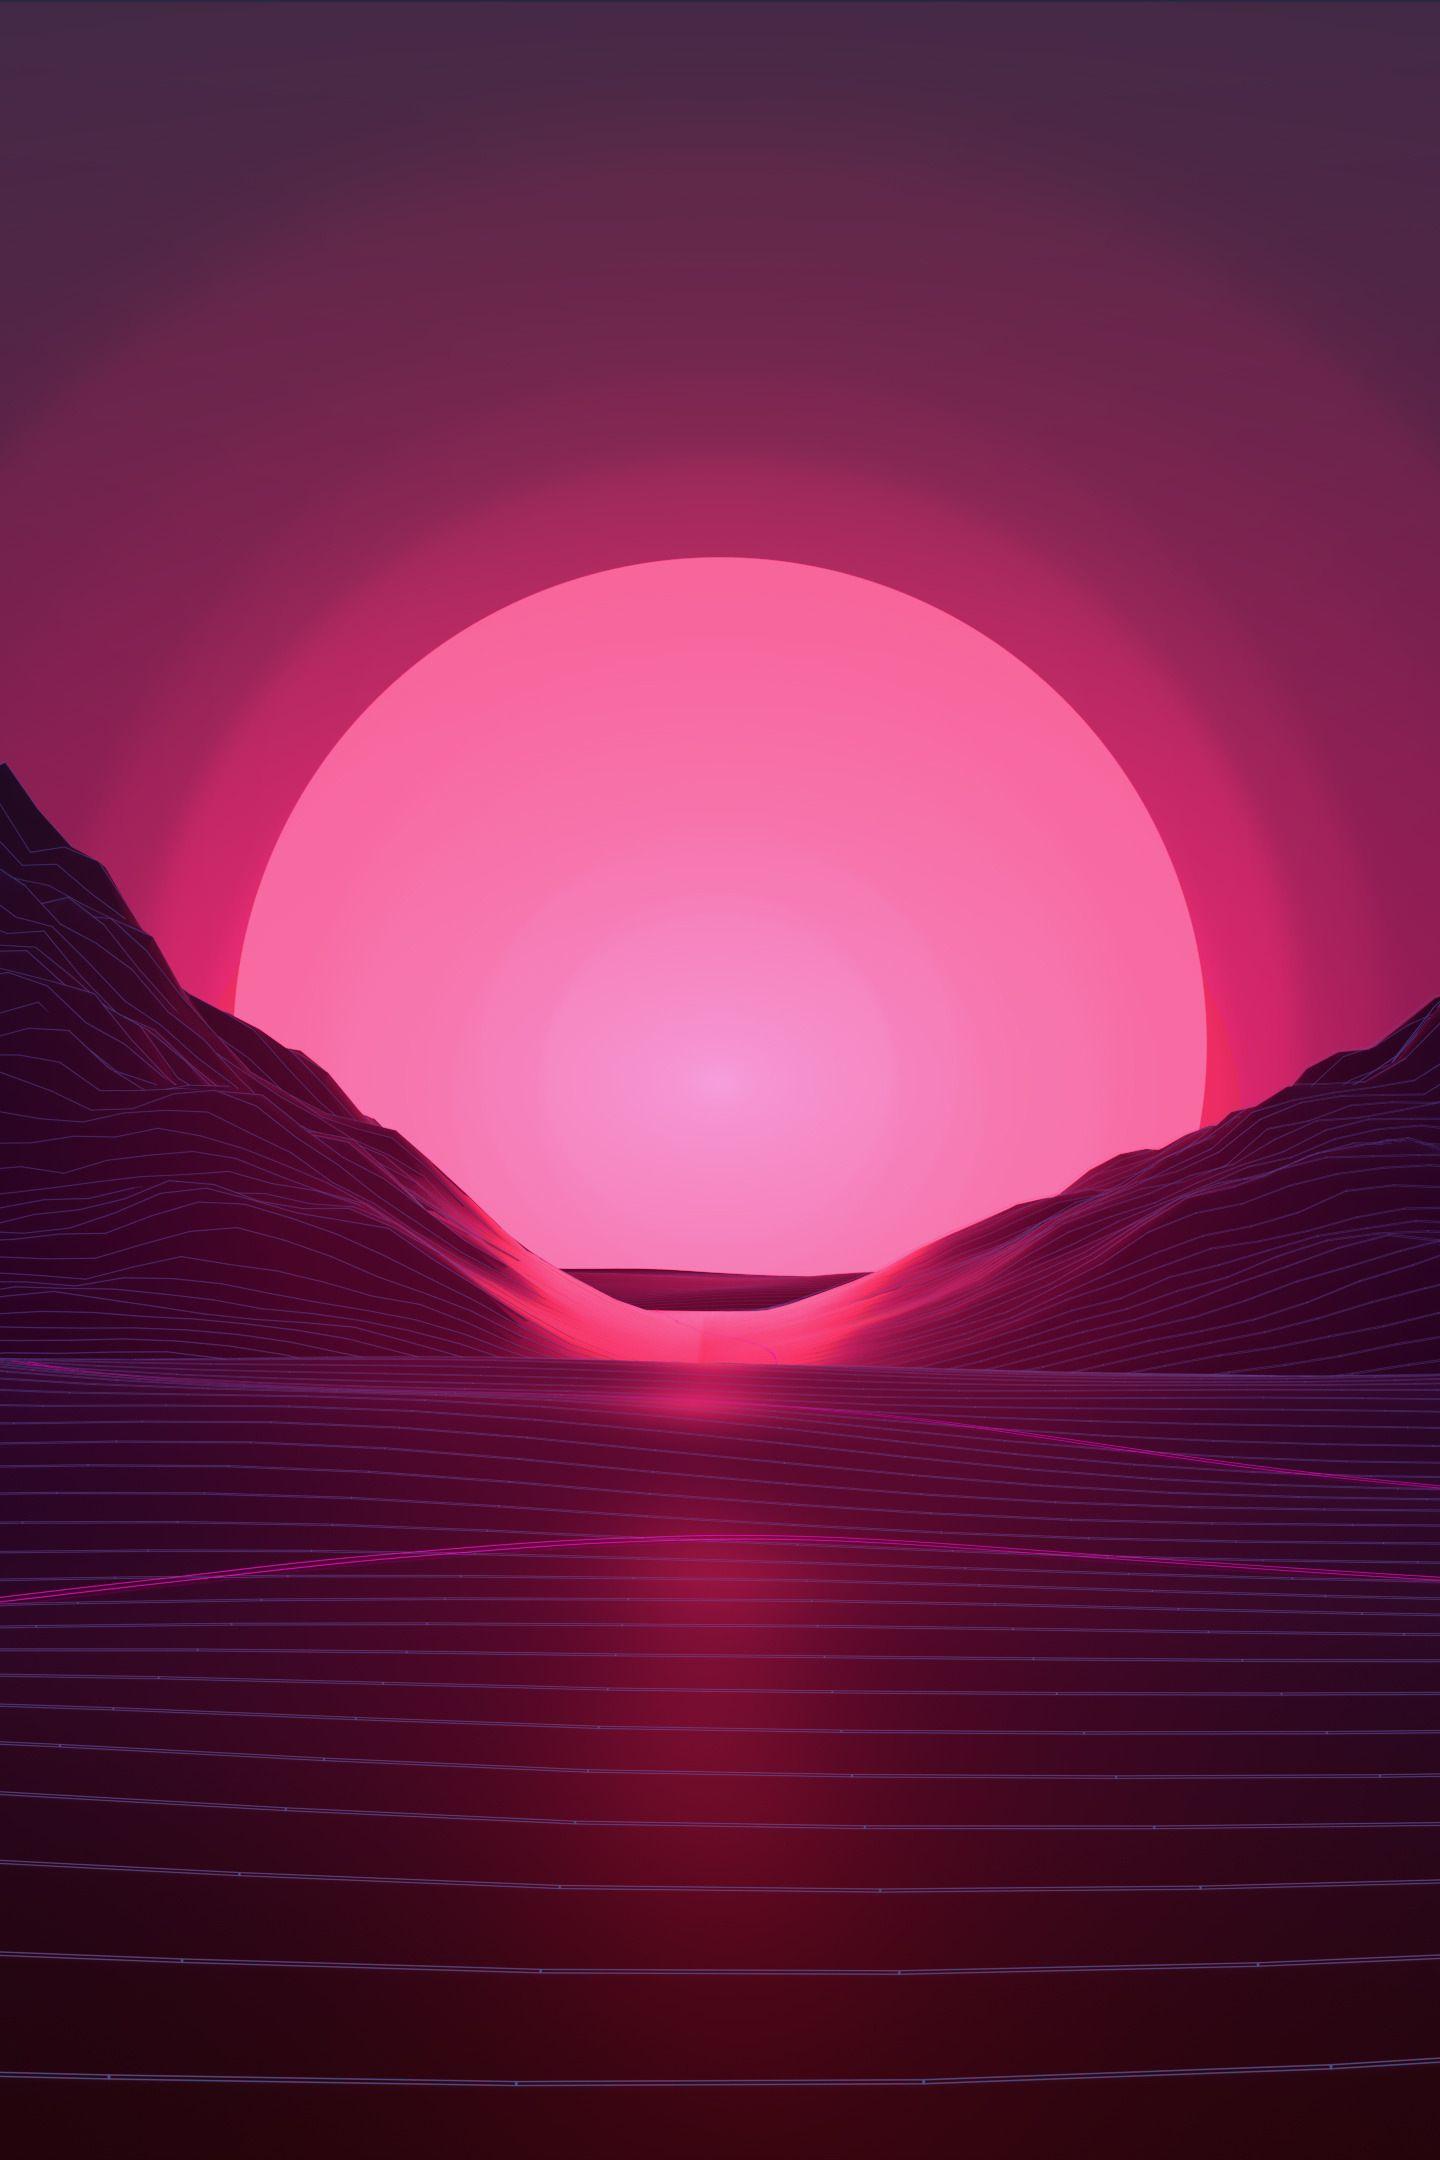 Download 1440x2960 wallpaper sunset, mountains, neon pink, abstract